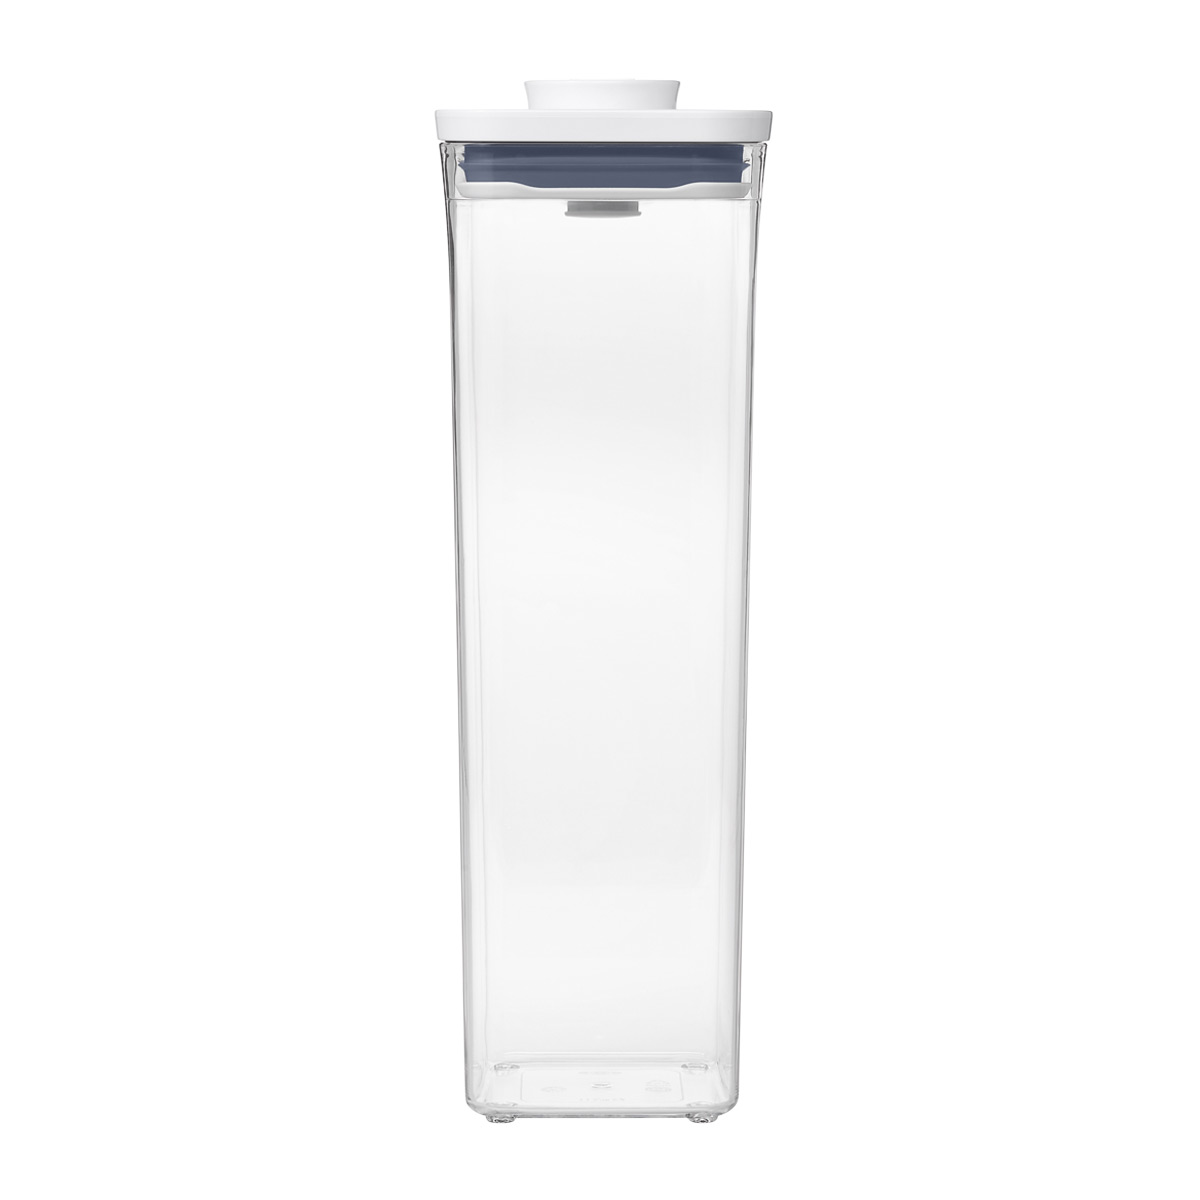 https://www.containerstore.com/catalogimages/369094/10075143-OXO-2.2-qt-POP-Container-Sm.jpg